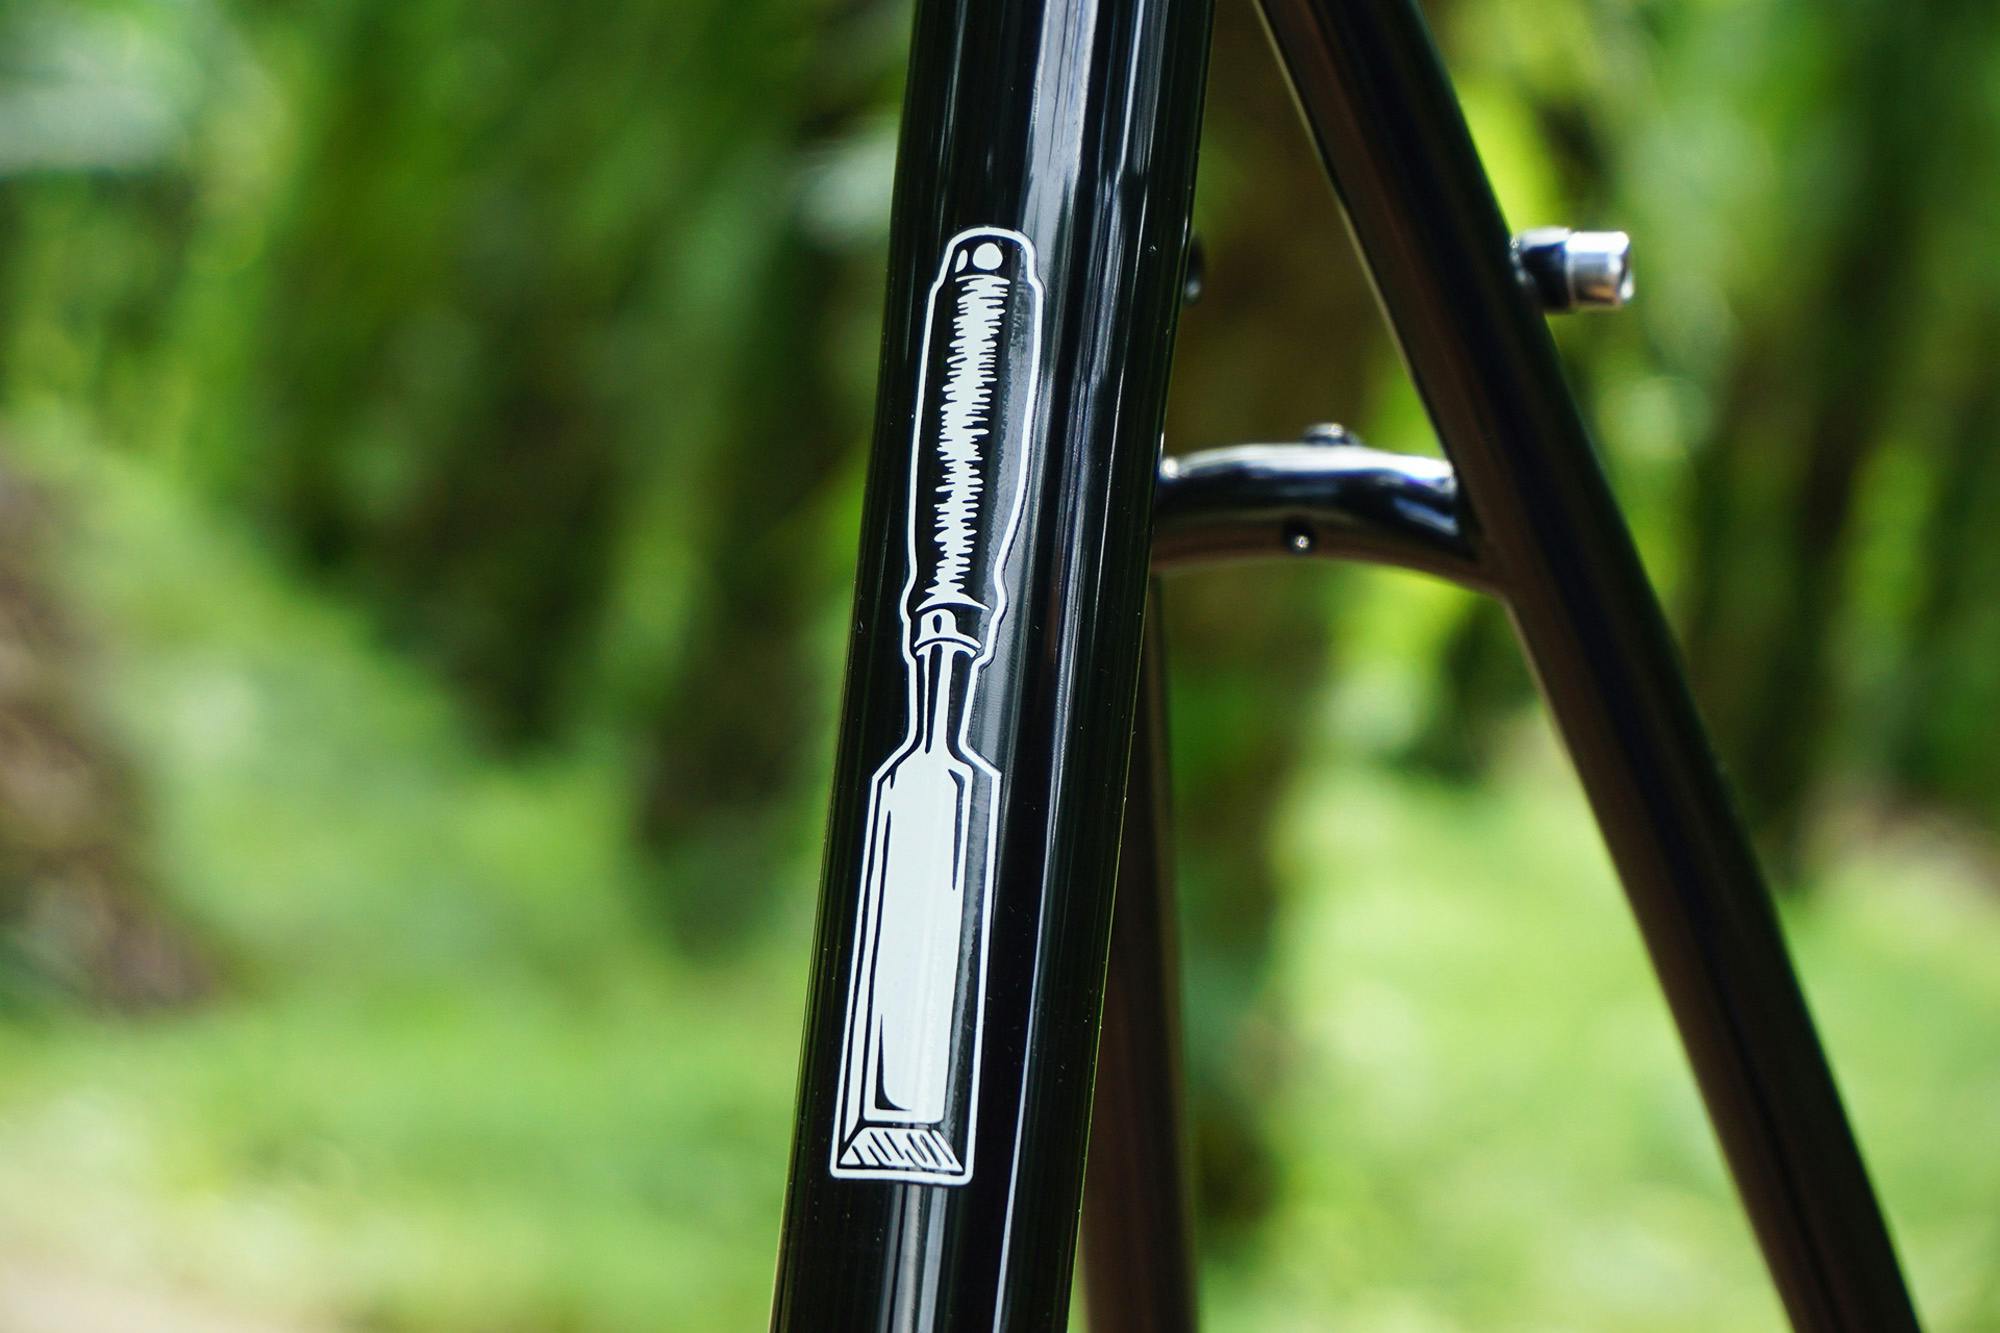 A graphic on the seat tube.